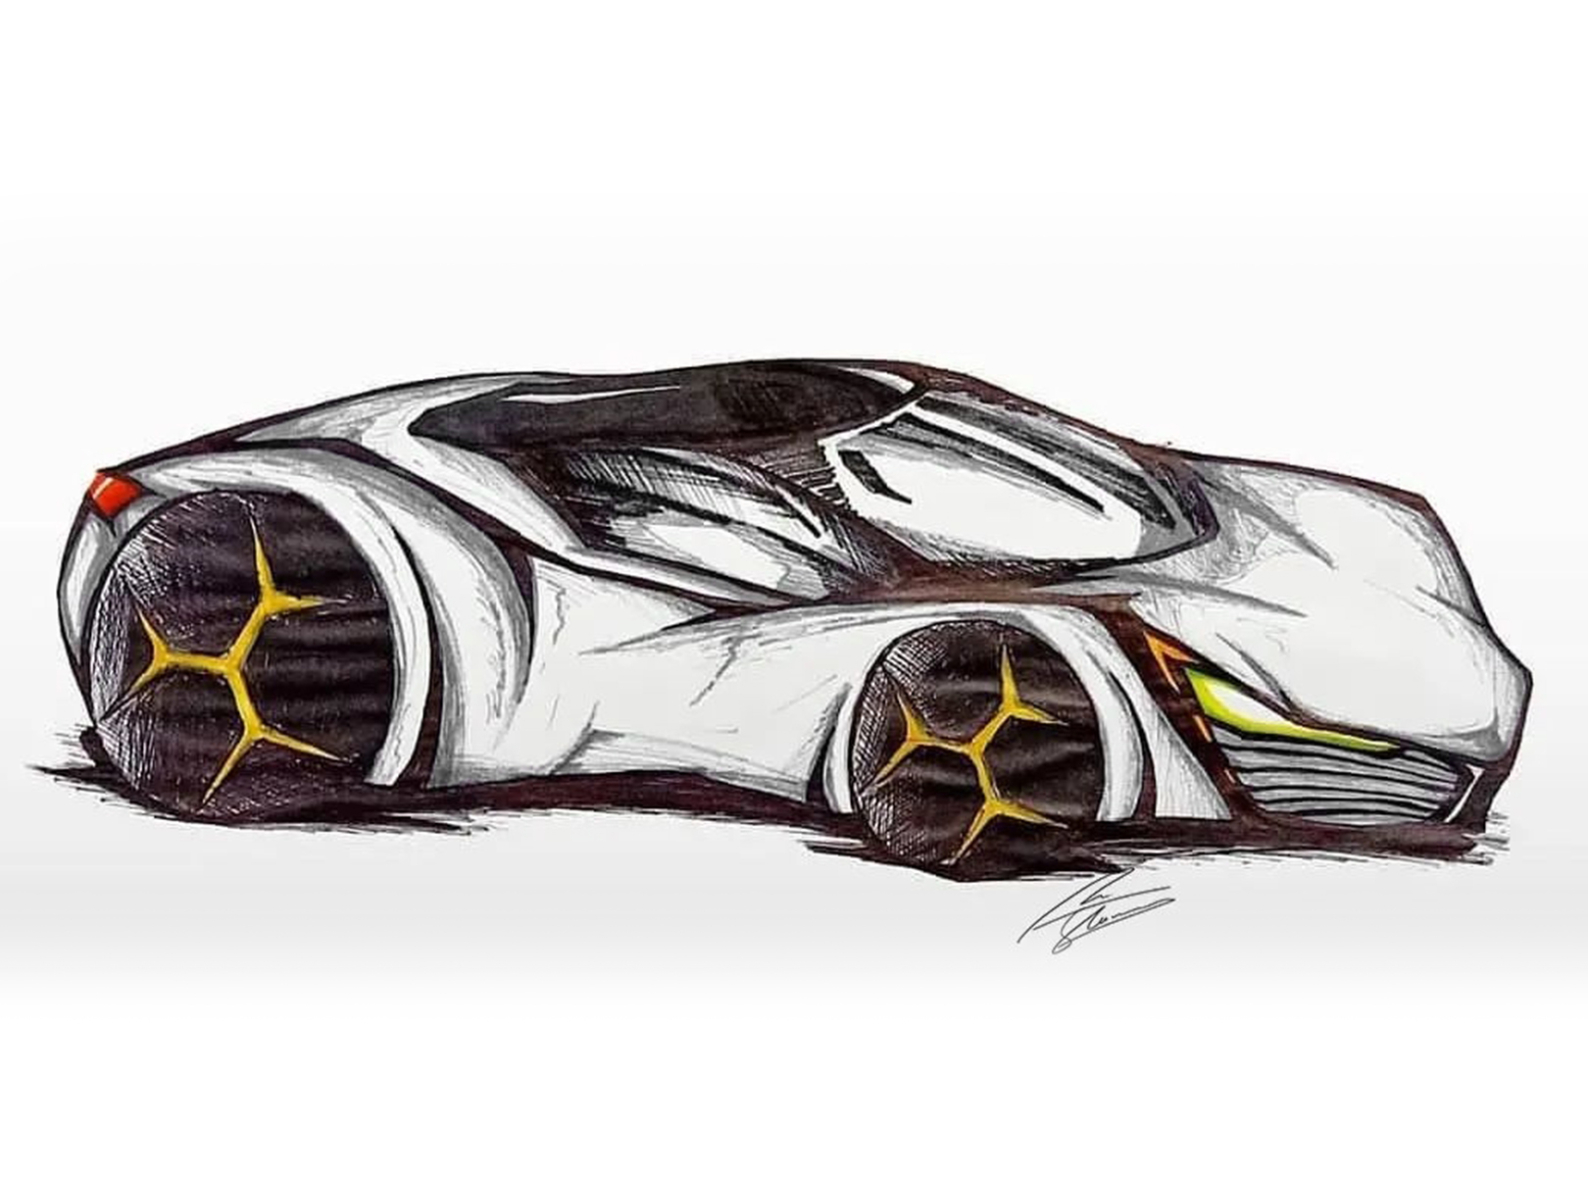 How to draw a car: Two step-by-step tutorials | Adobe